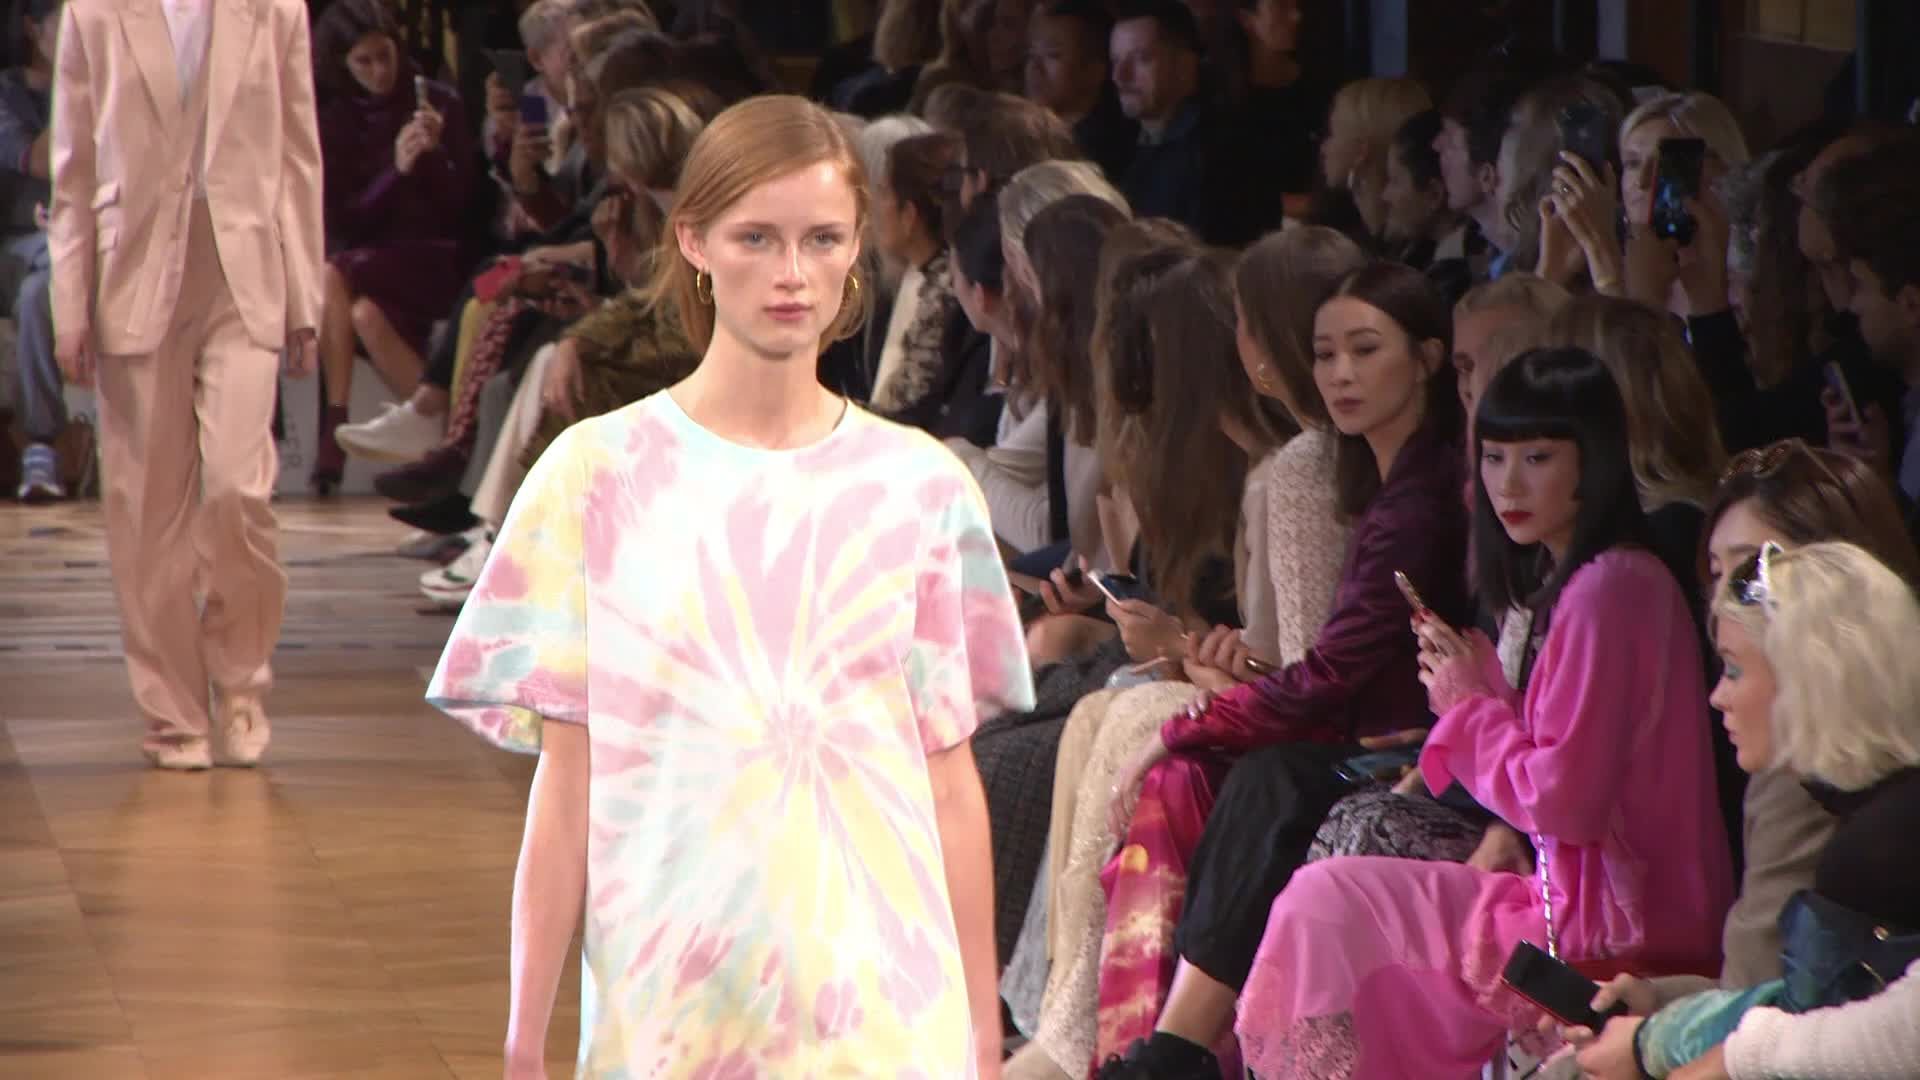 Tie-Dye Makes A Comeback With These Louis Vuitton And Prada Collections